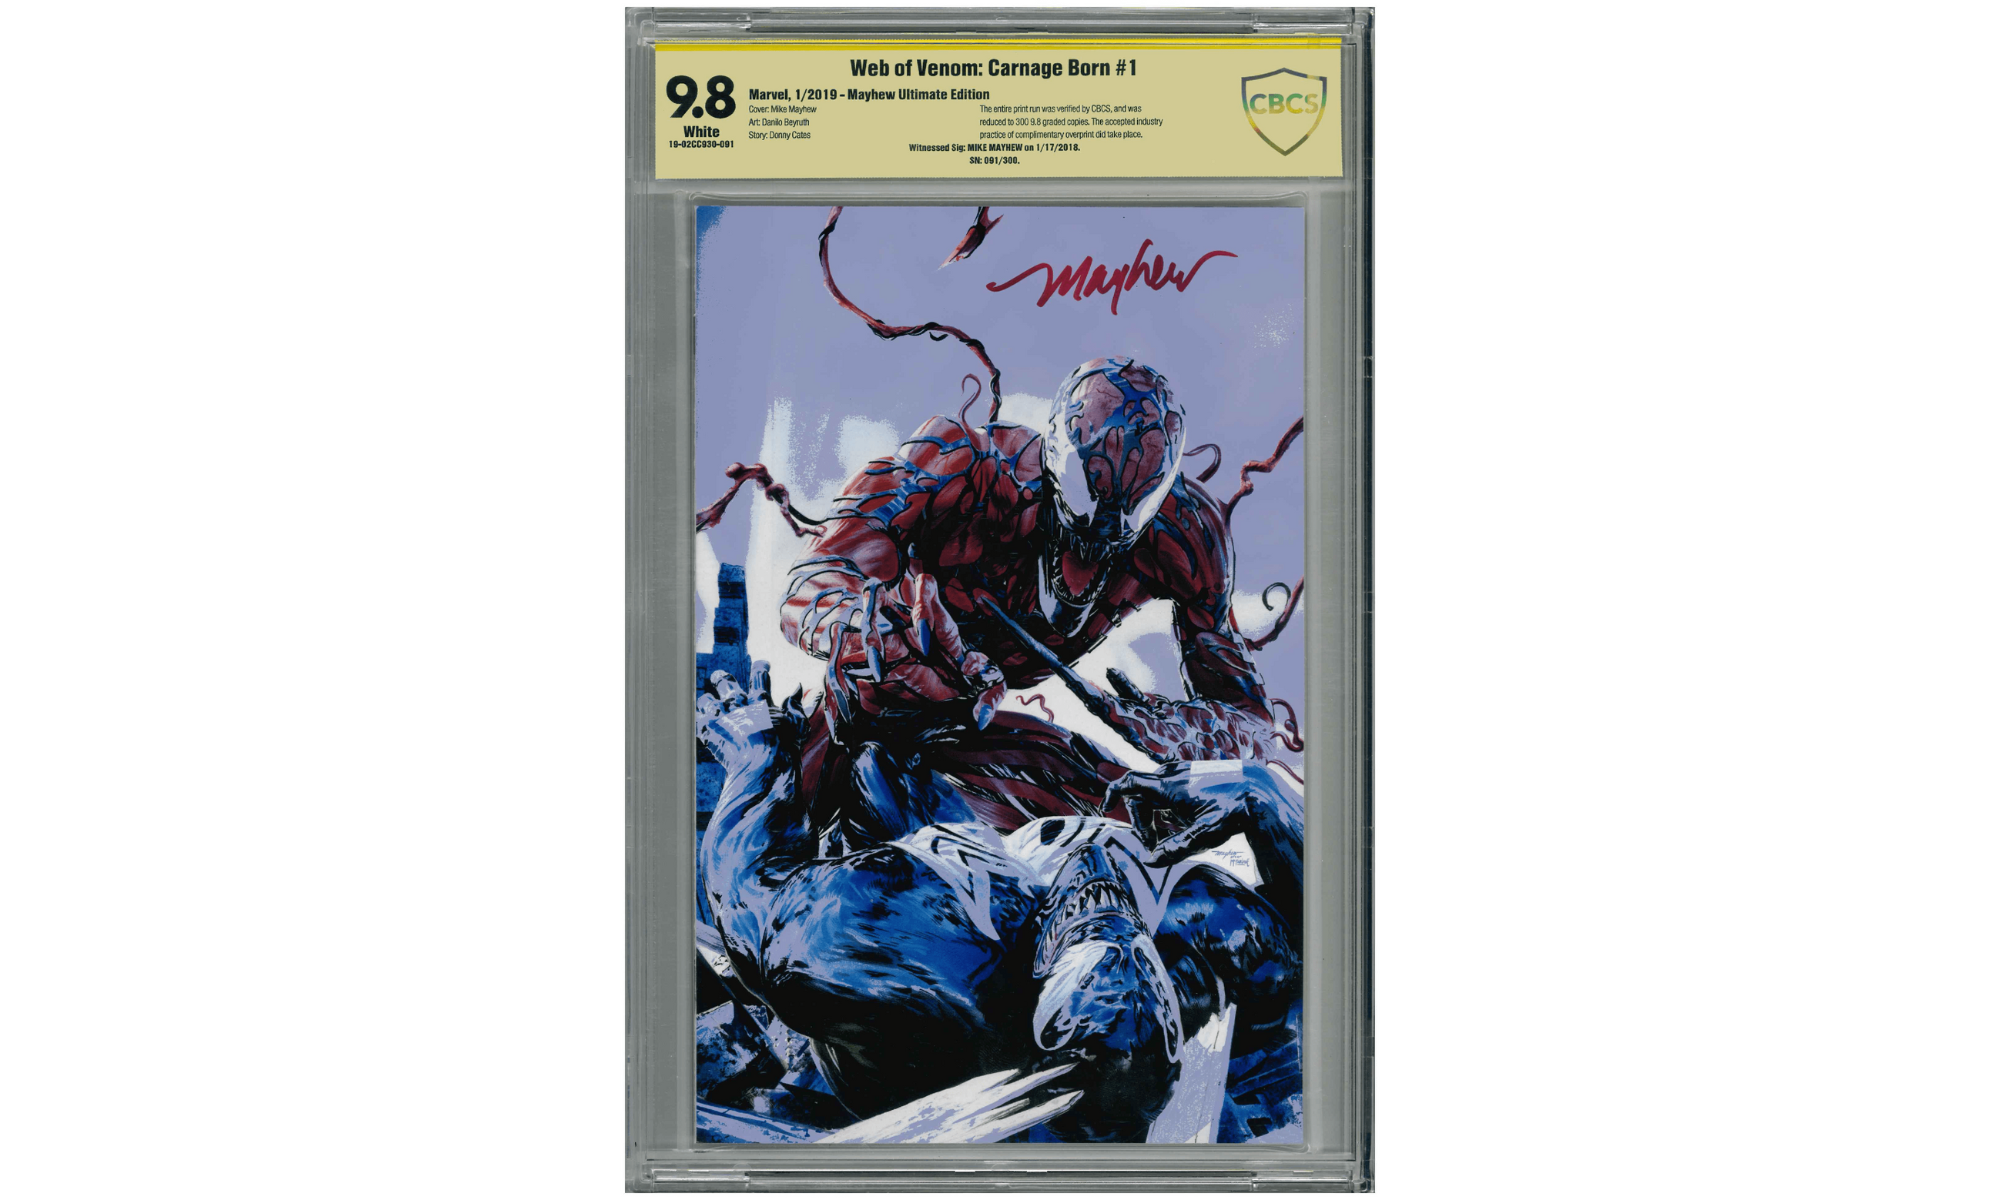 Web of Venom: Carnage Born #1 | Signed by Mike Mayhew Graded 9.8 by CBCS